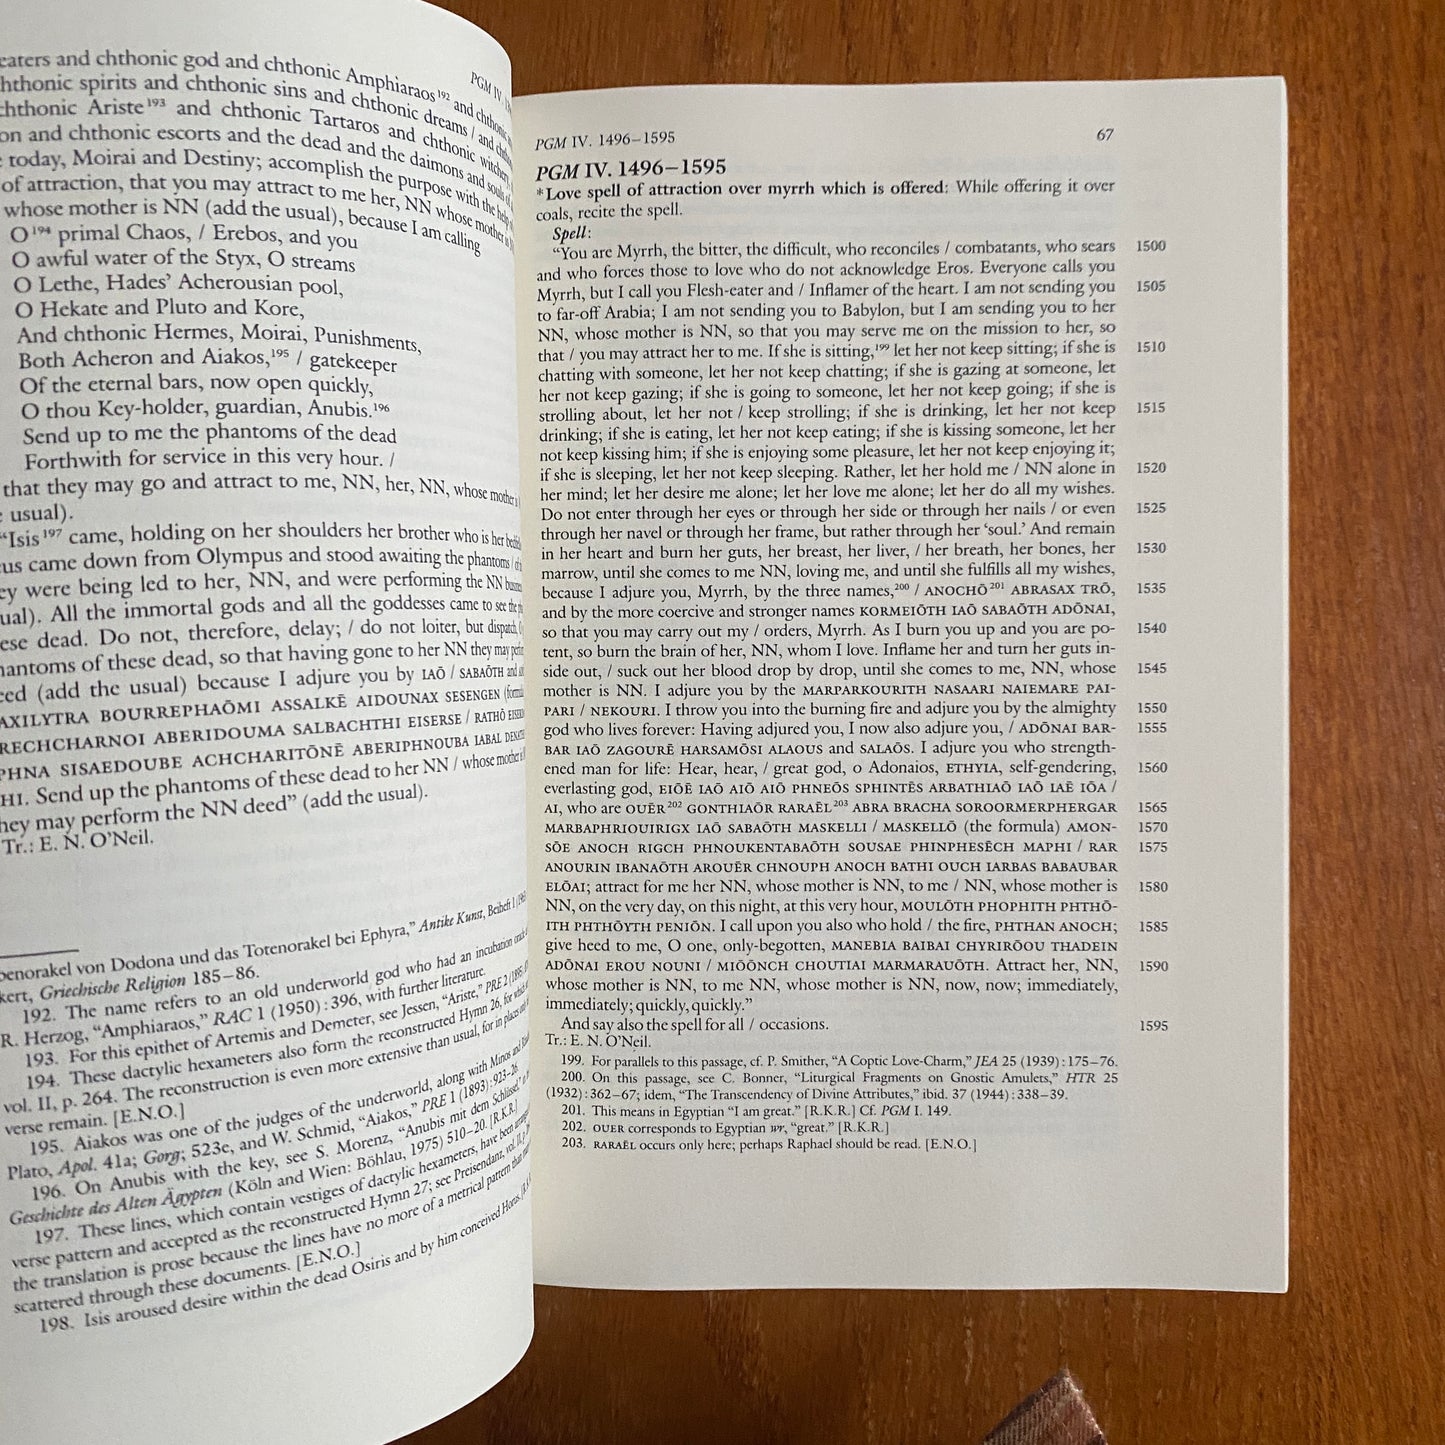 The Greek Magical Papyri In Translation: Including the Demotic Spells Second Edition Volume One: Texts With an Updated Bibliography - Hans Dieter Betz